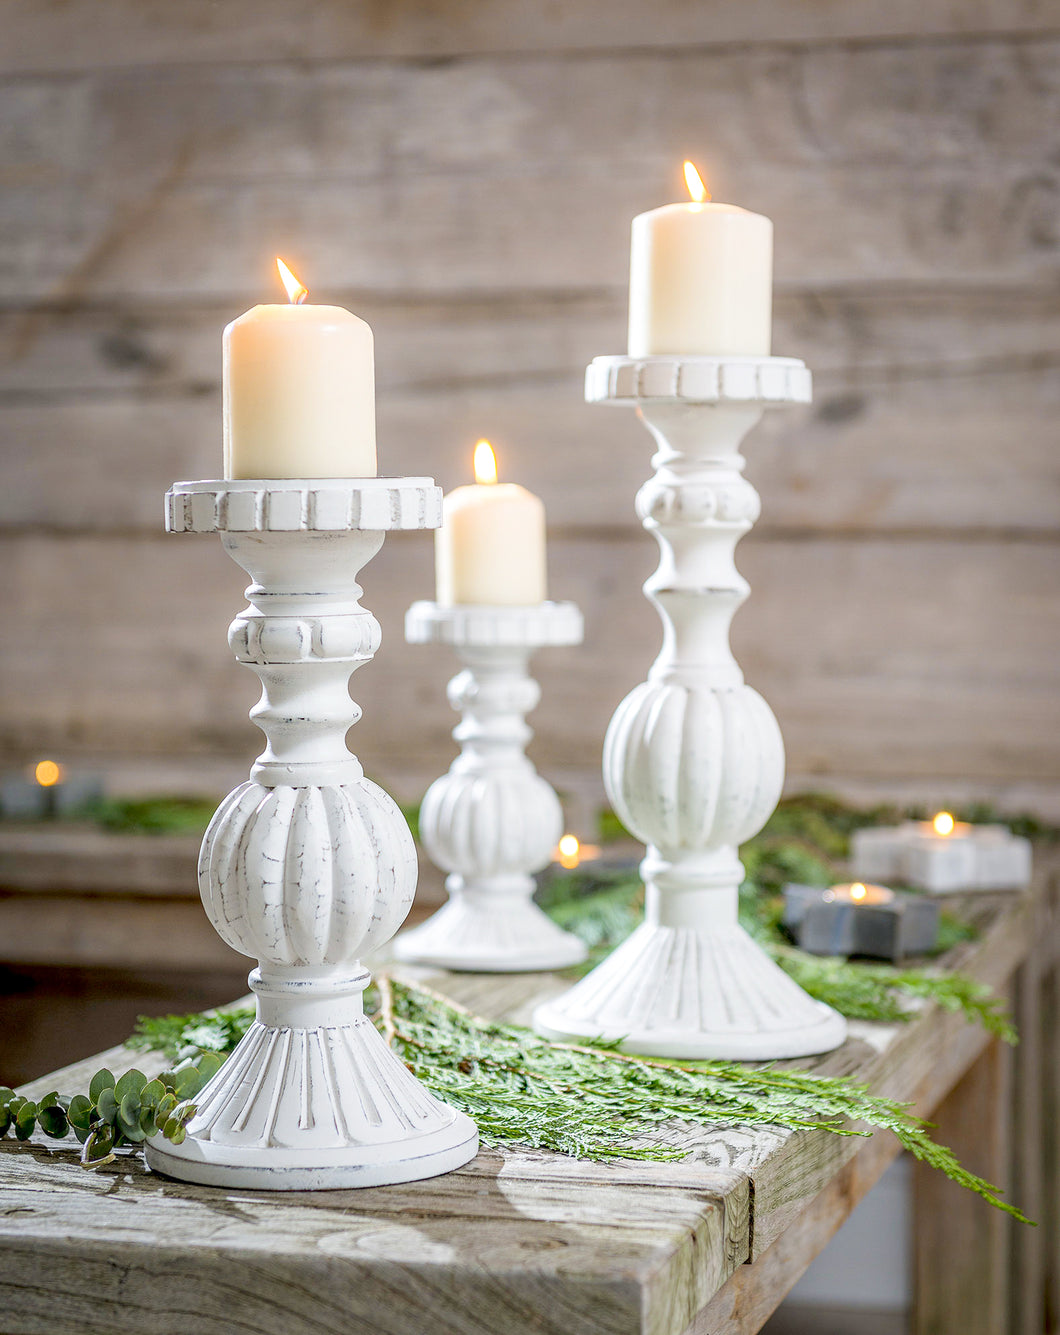 White Natural Wood Carved Candle Sticks - 3 Sizes